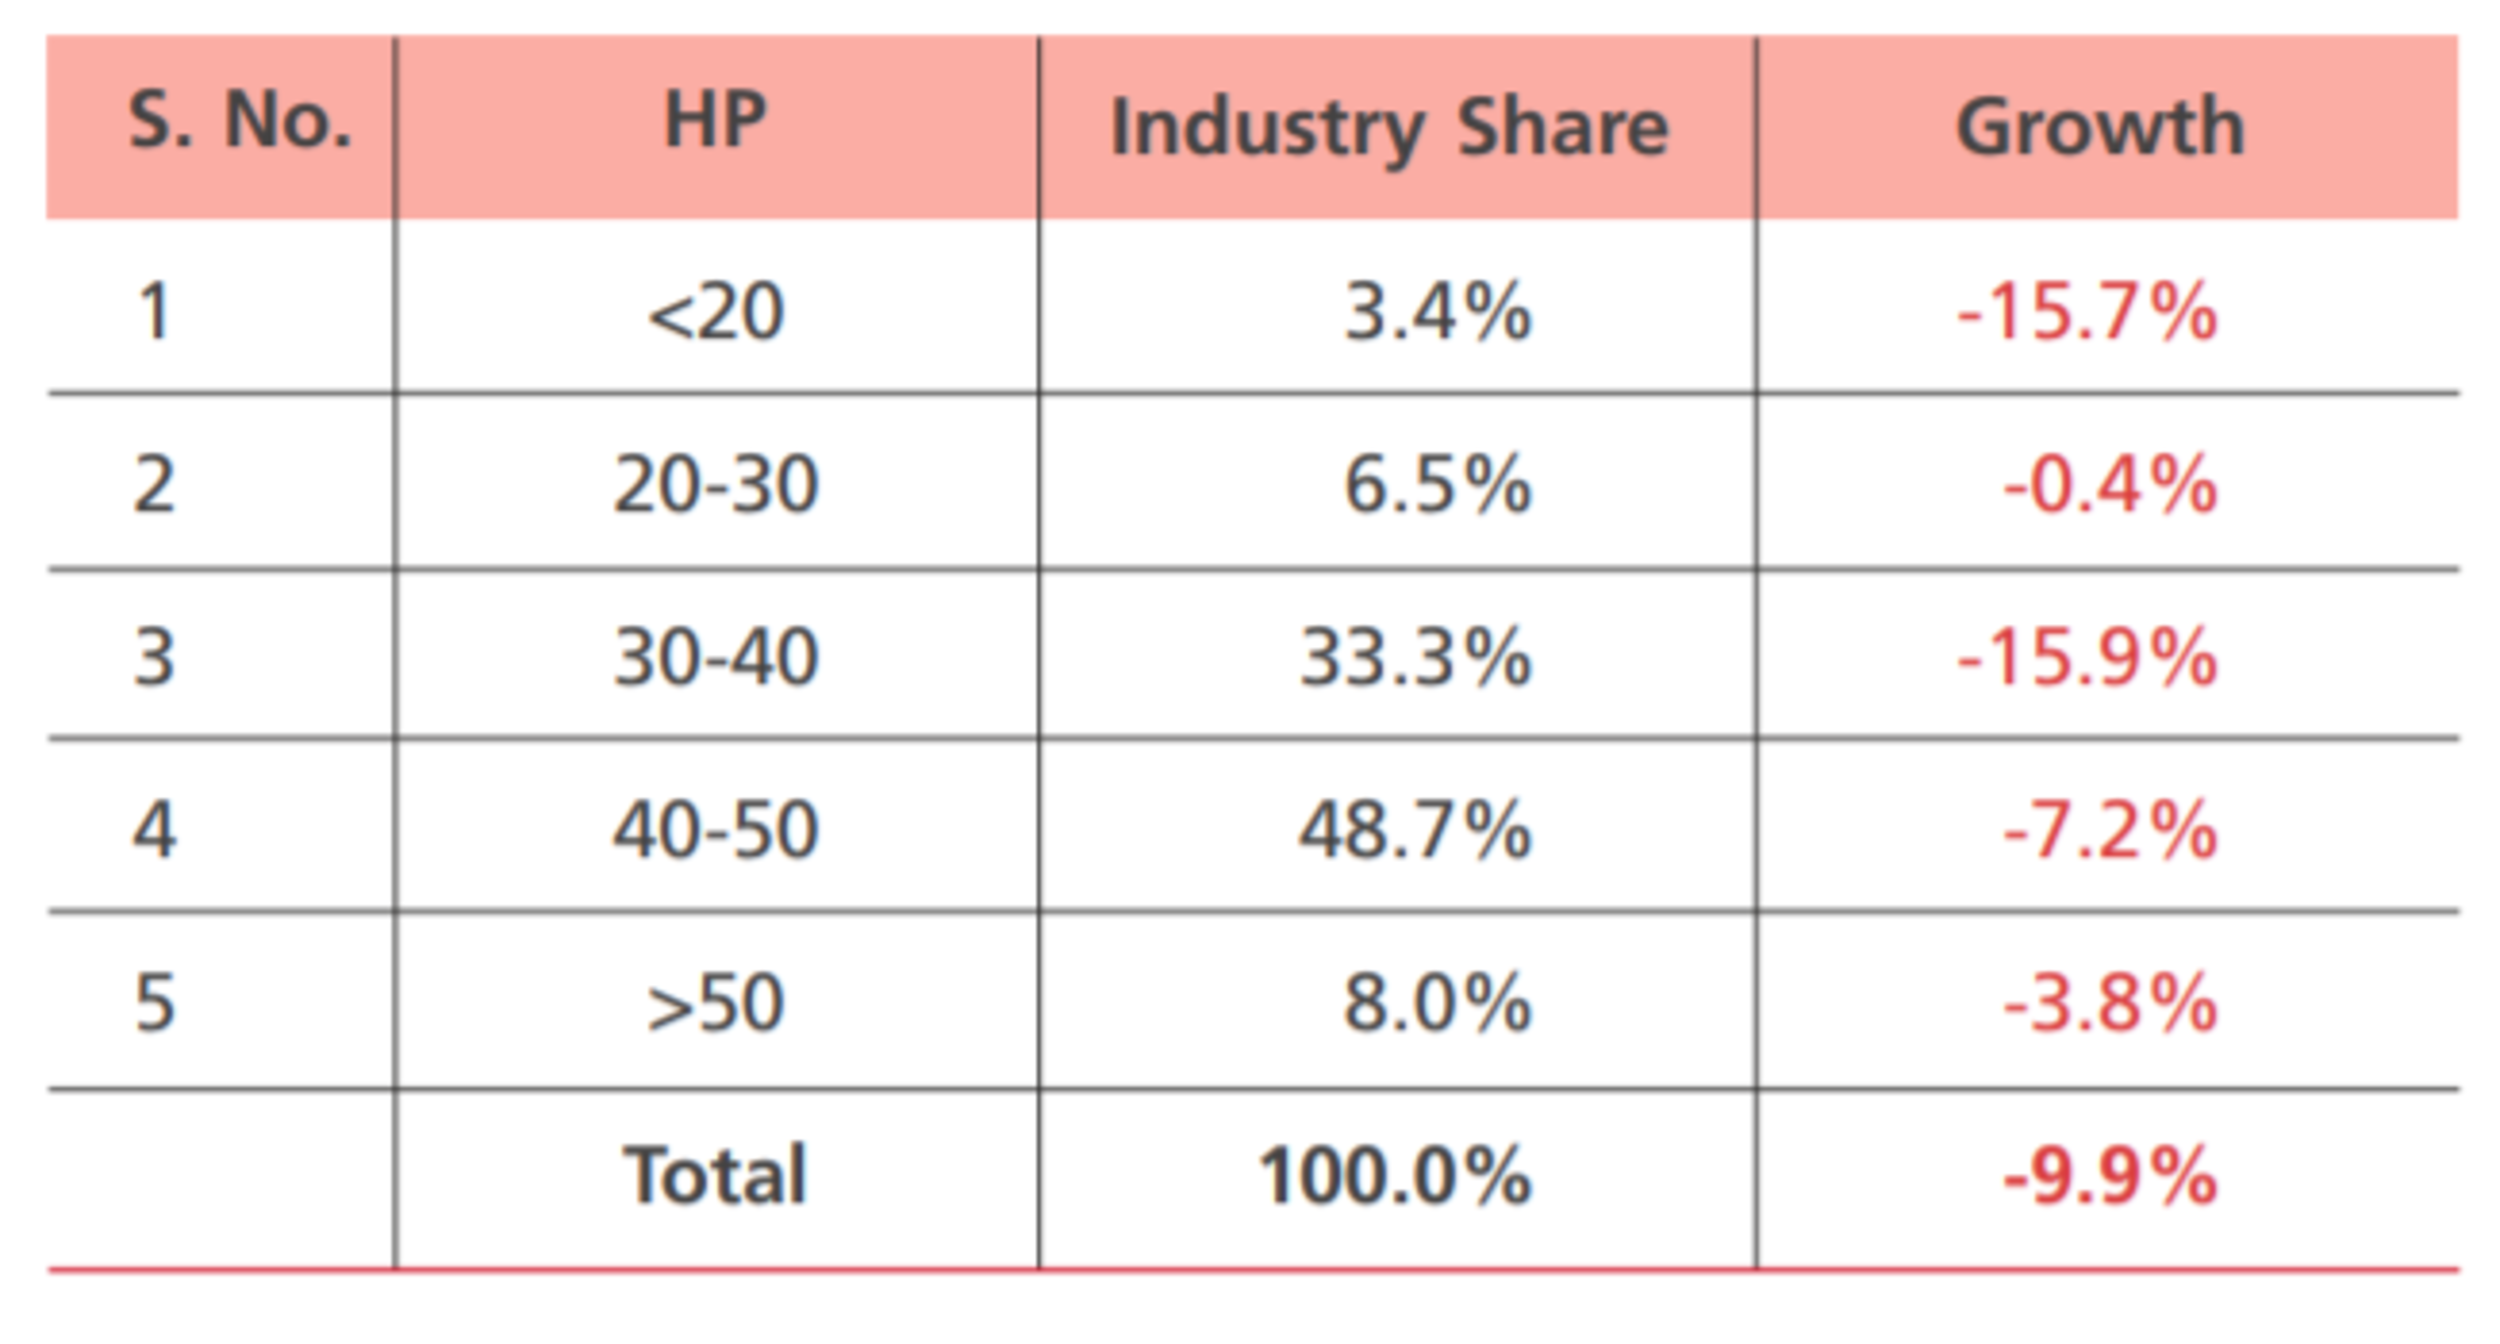 The 31-50 HP segment that accounts for more than 80% of industry